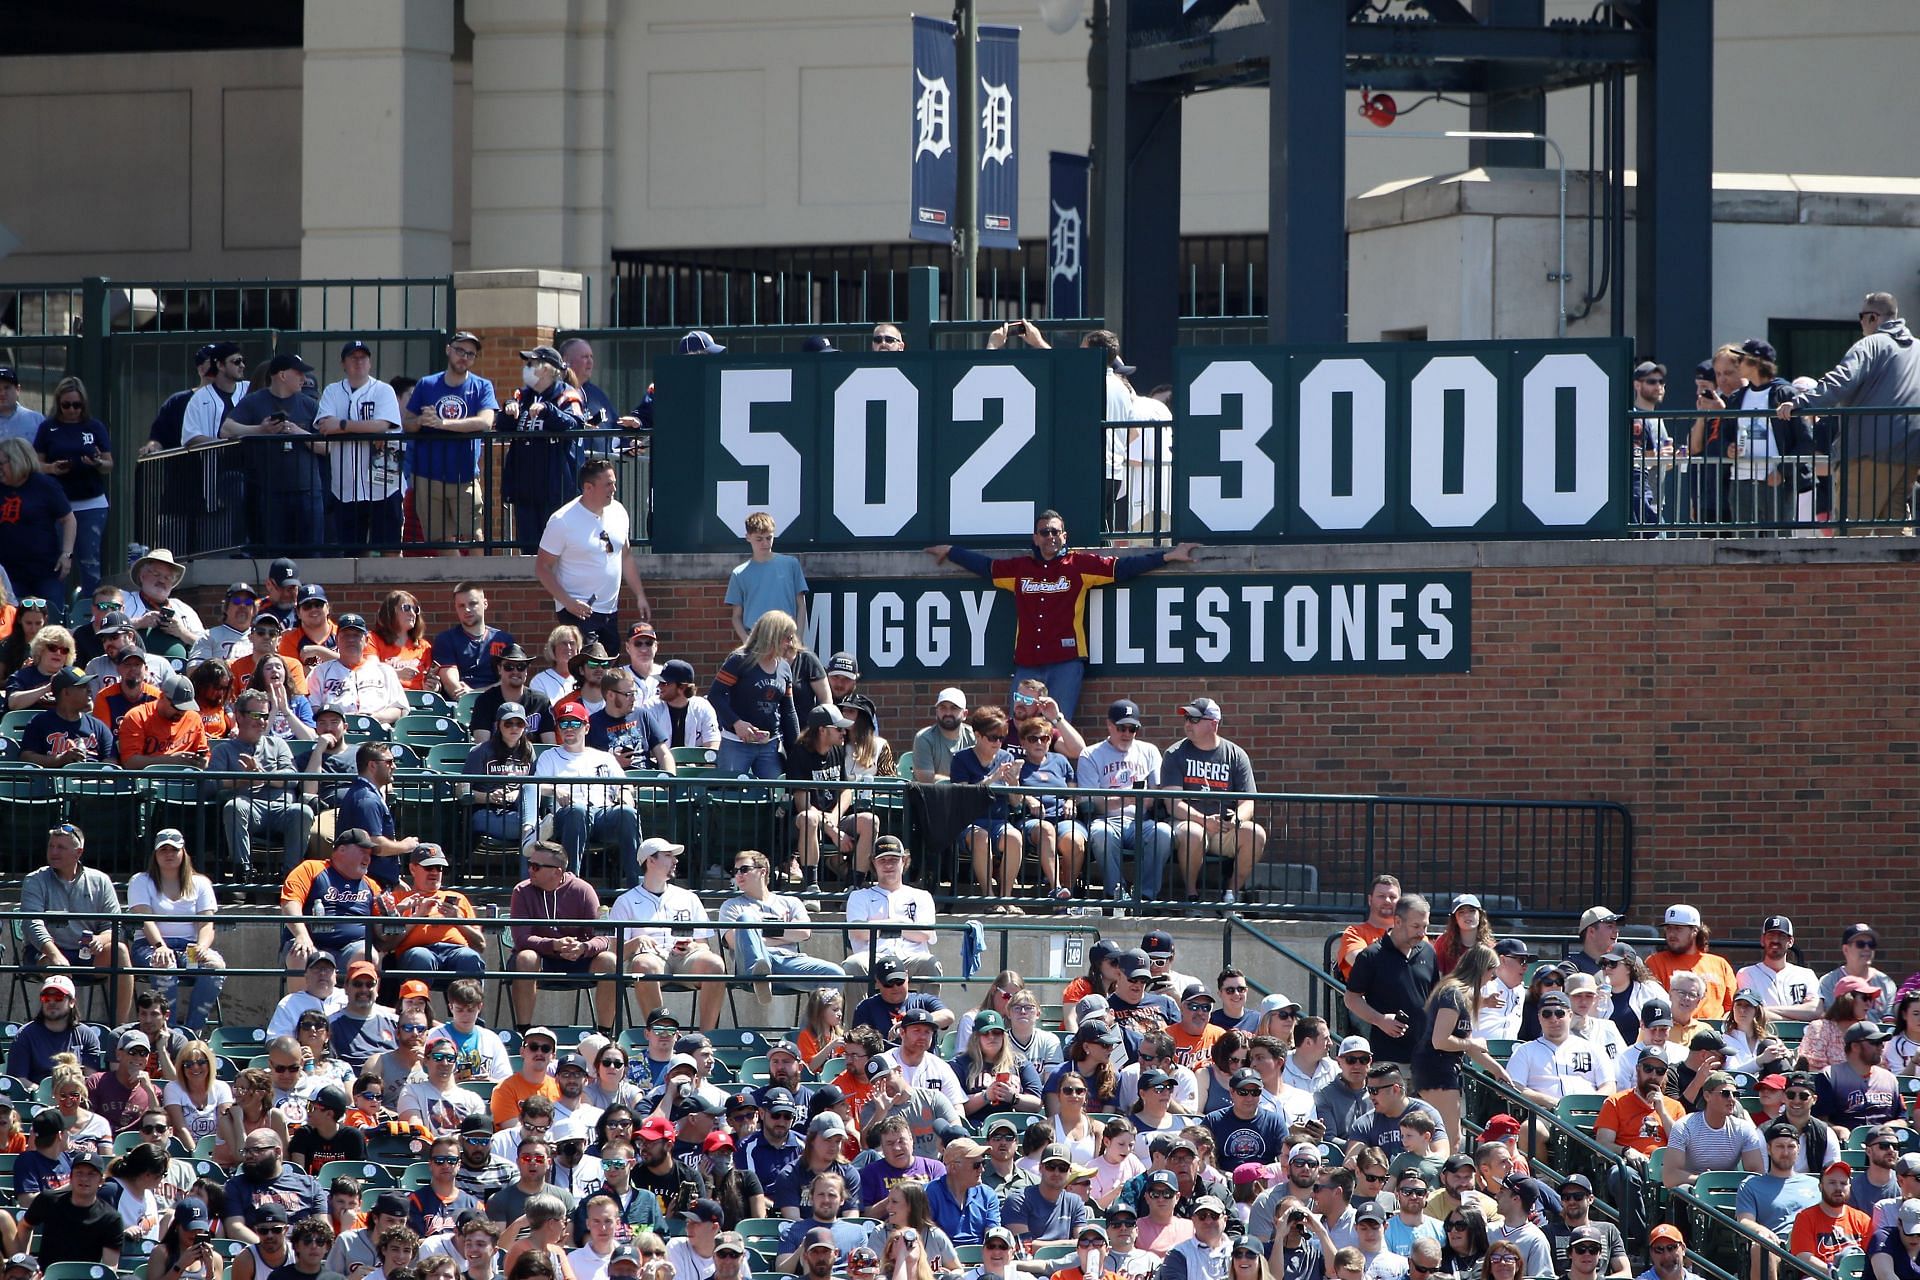 Detroit Tigers retired numbers